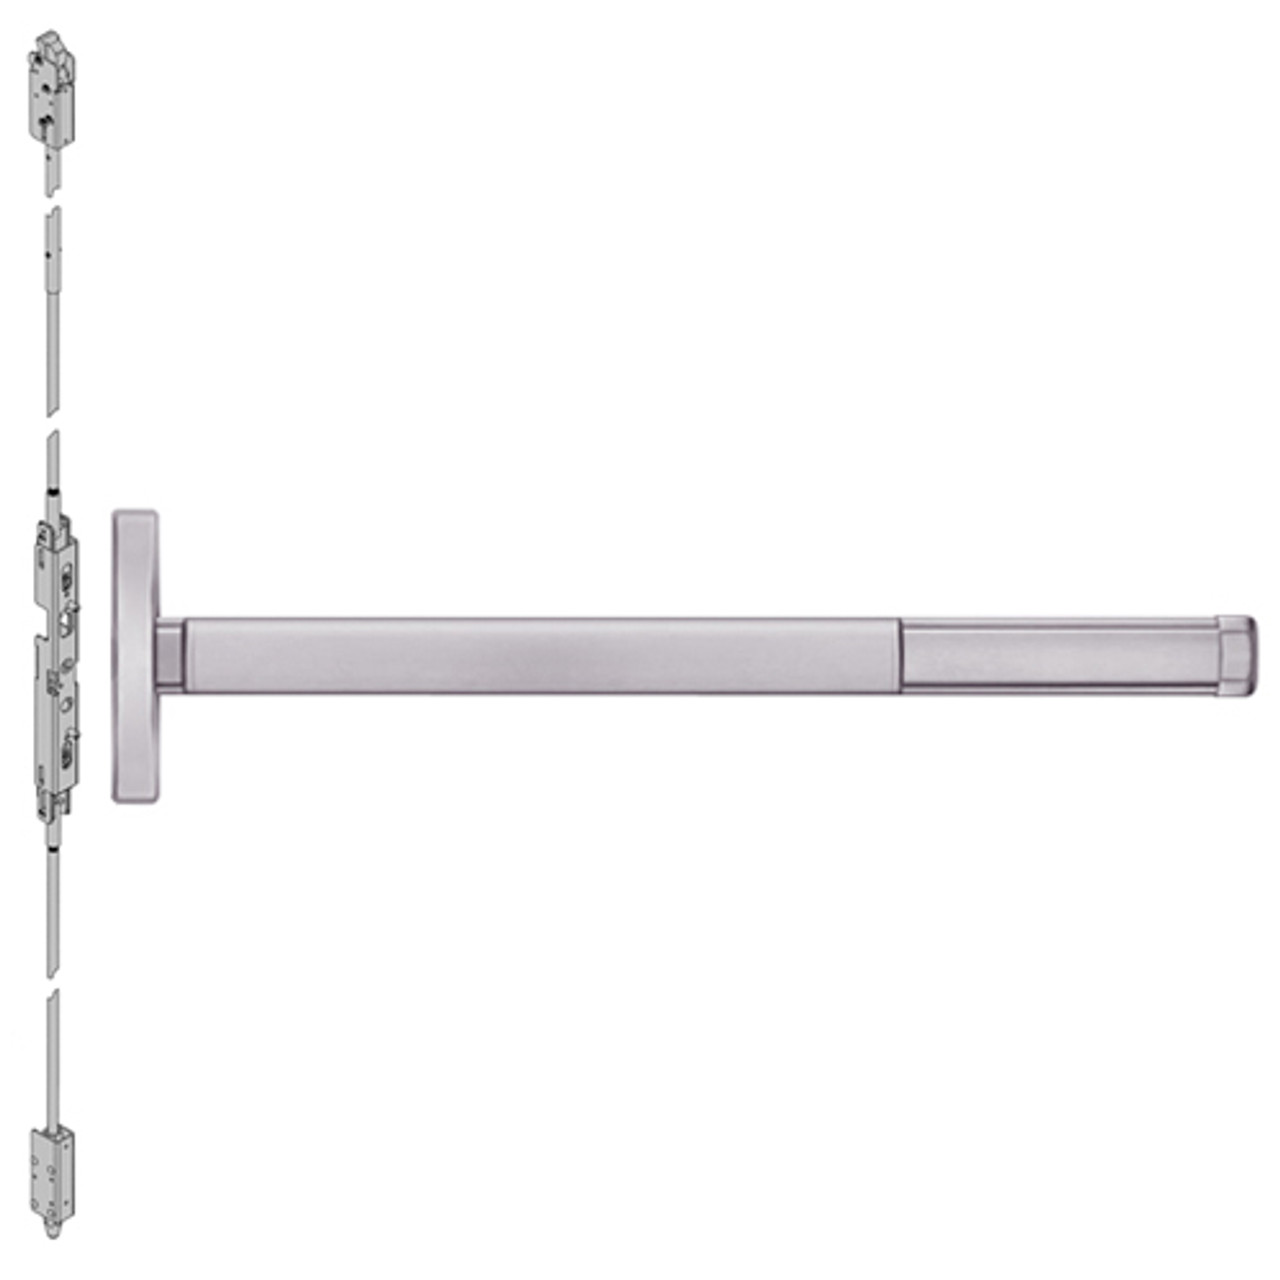 DE2602LBR-630-48 PHI 2600 Series Concealed Vertical Rod Exit Device with Delayed Egress Prepped for Dummy Trim in Satin Stainless Steel Finish